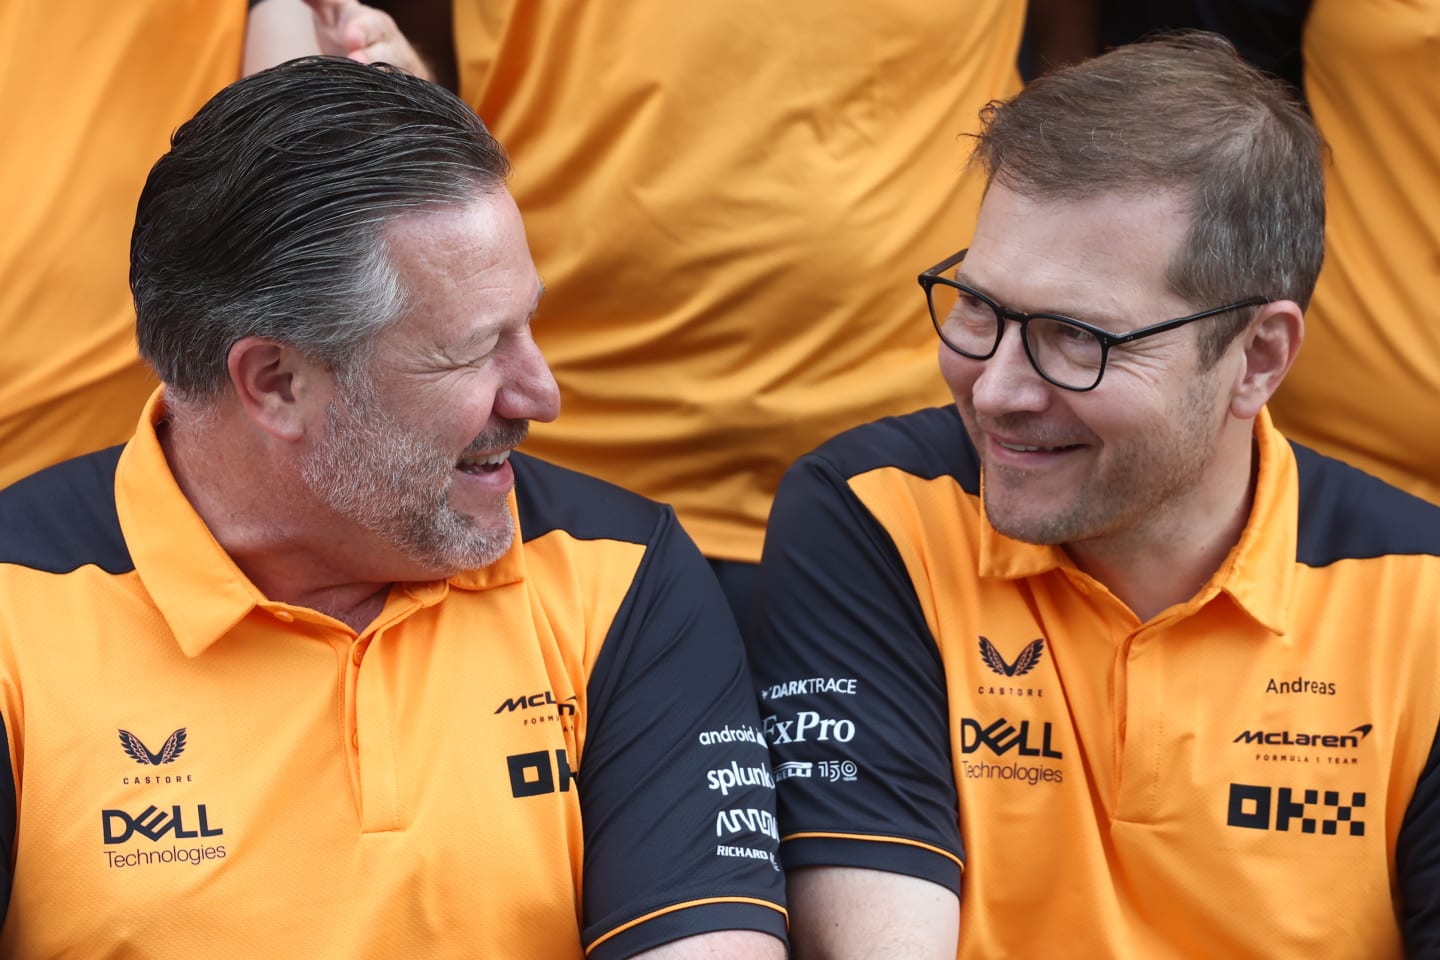 Zak Brown and Andreas Seidl before a photo with McLaren team during the Formula 1 Abu Dhabi Grand